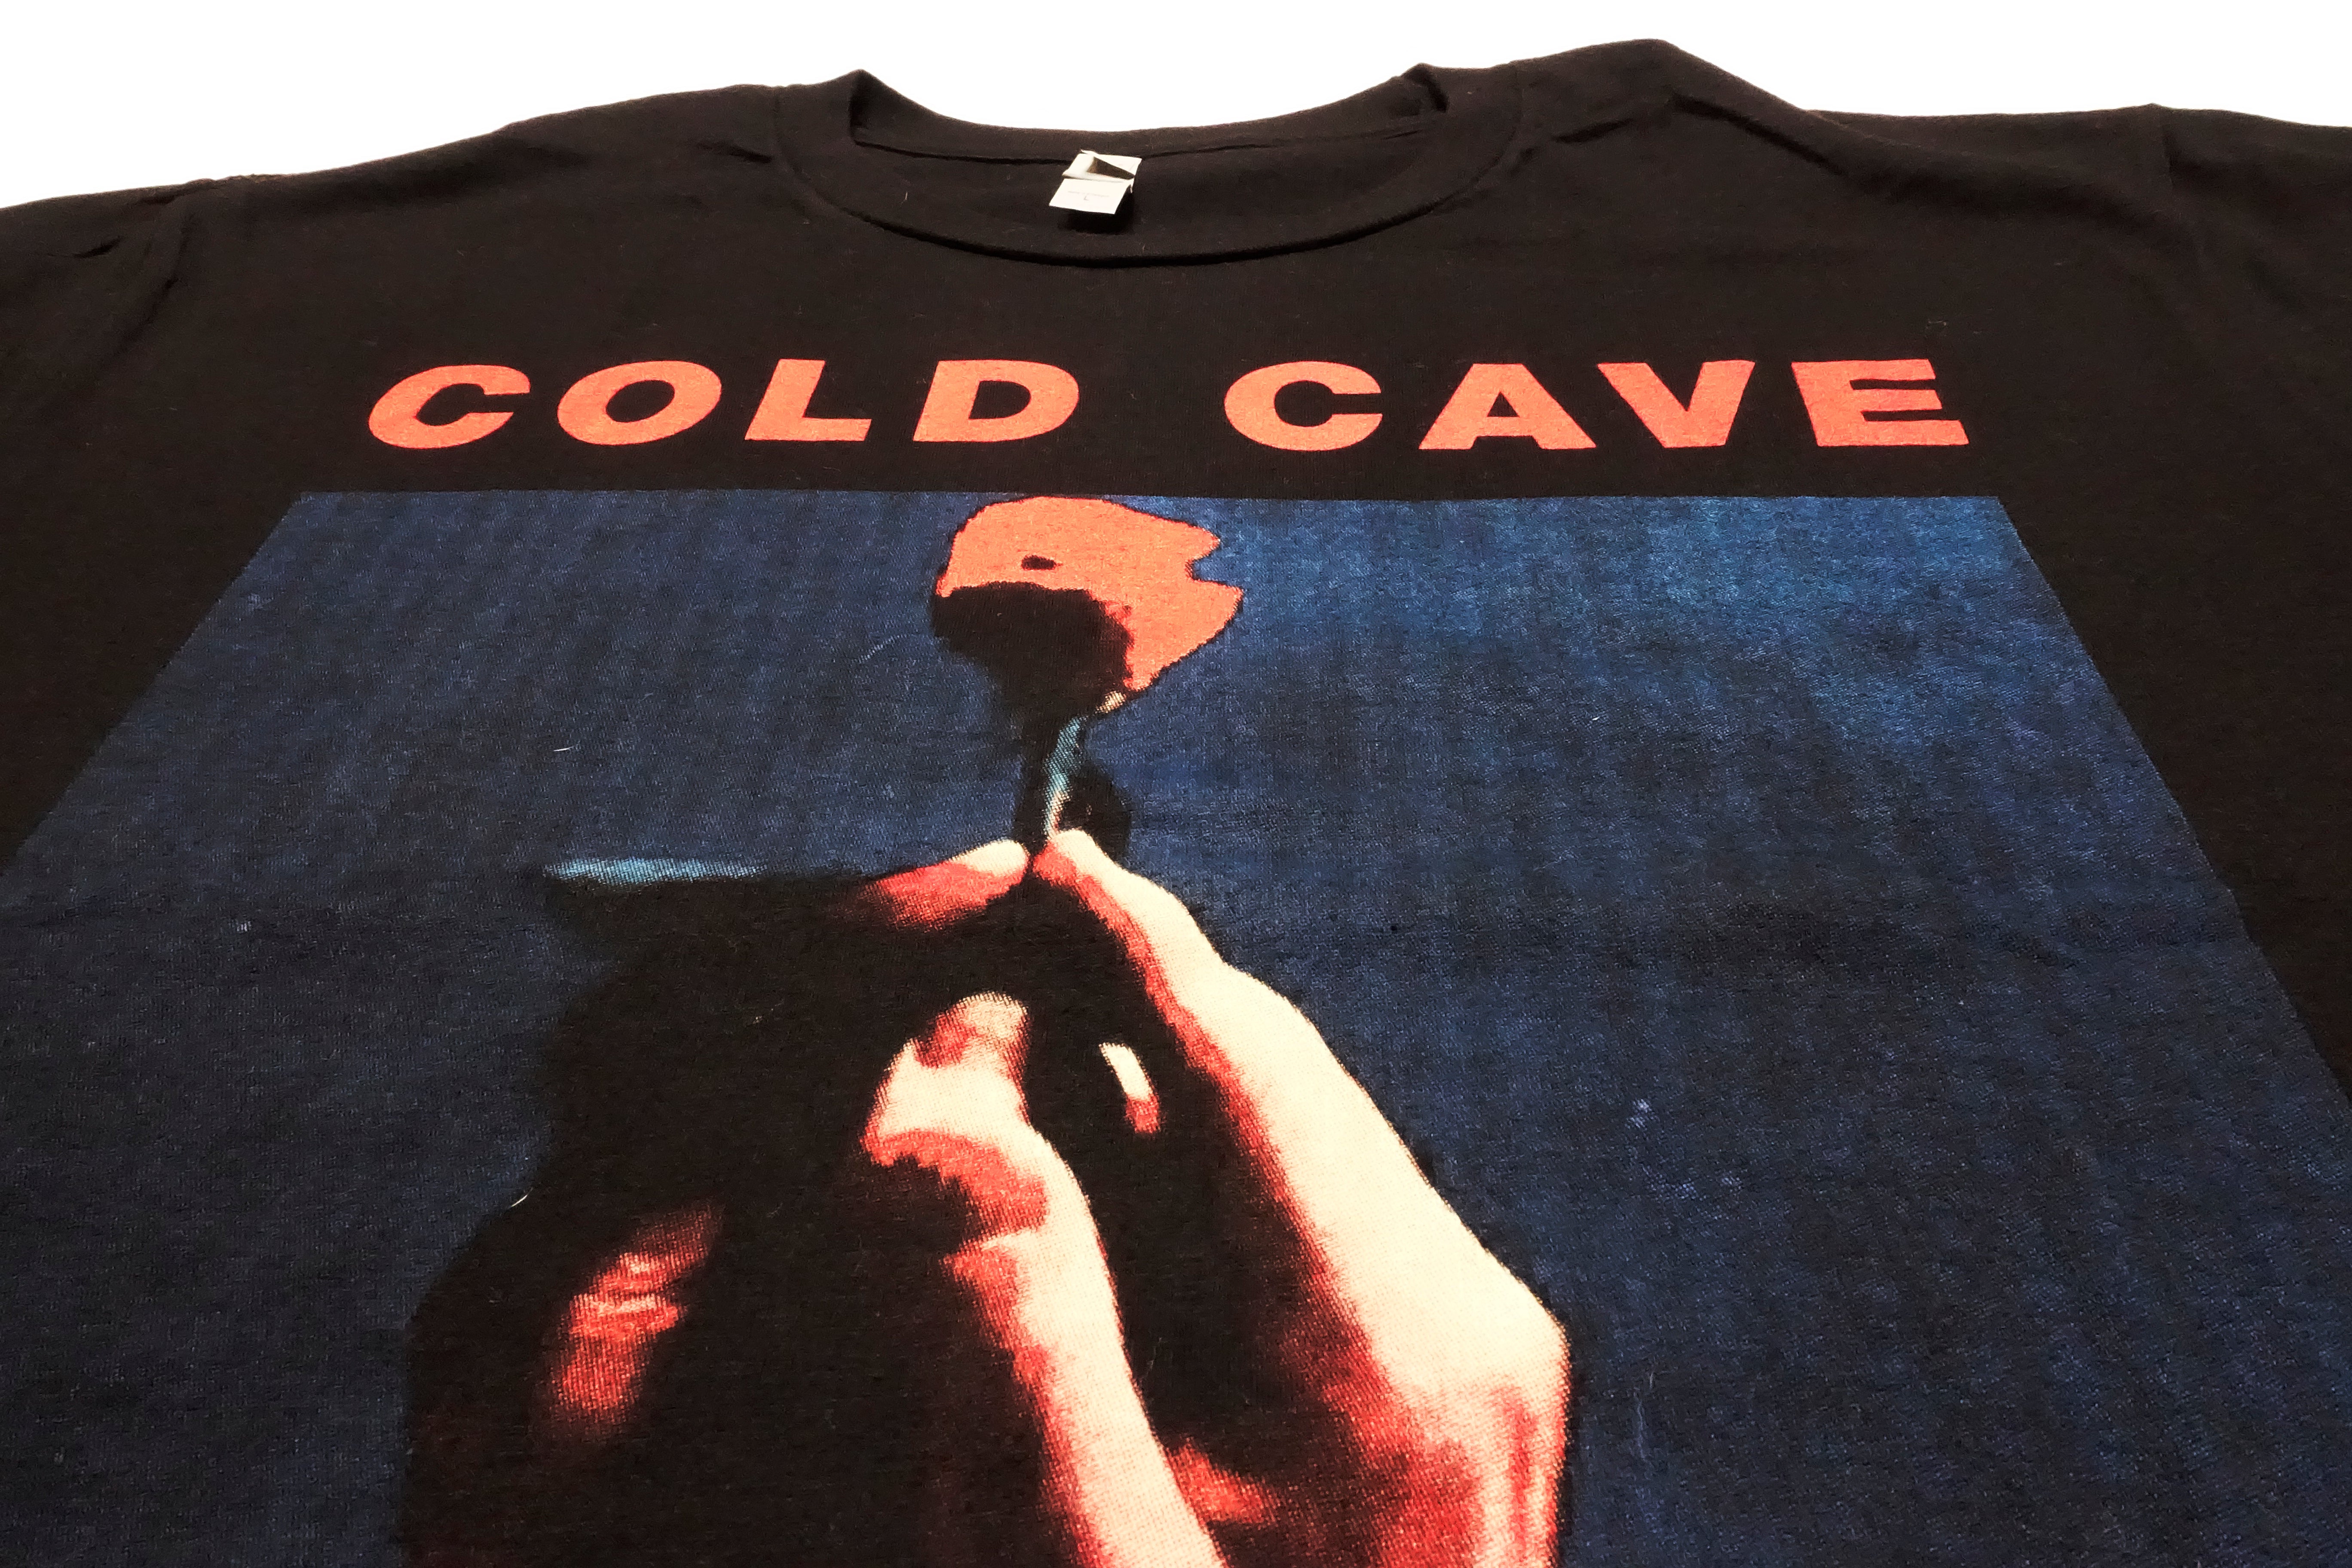 Cold Cave - Cherish The Light Years 2011 Tour Shirt Size Large